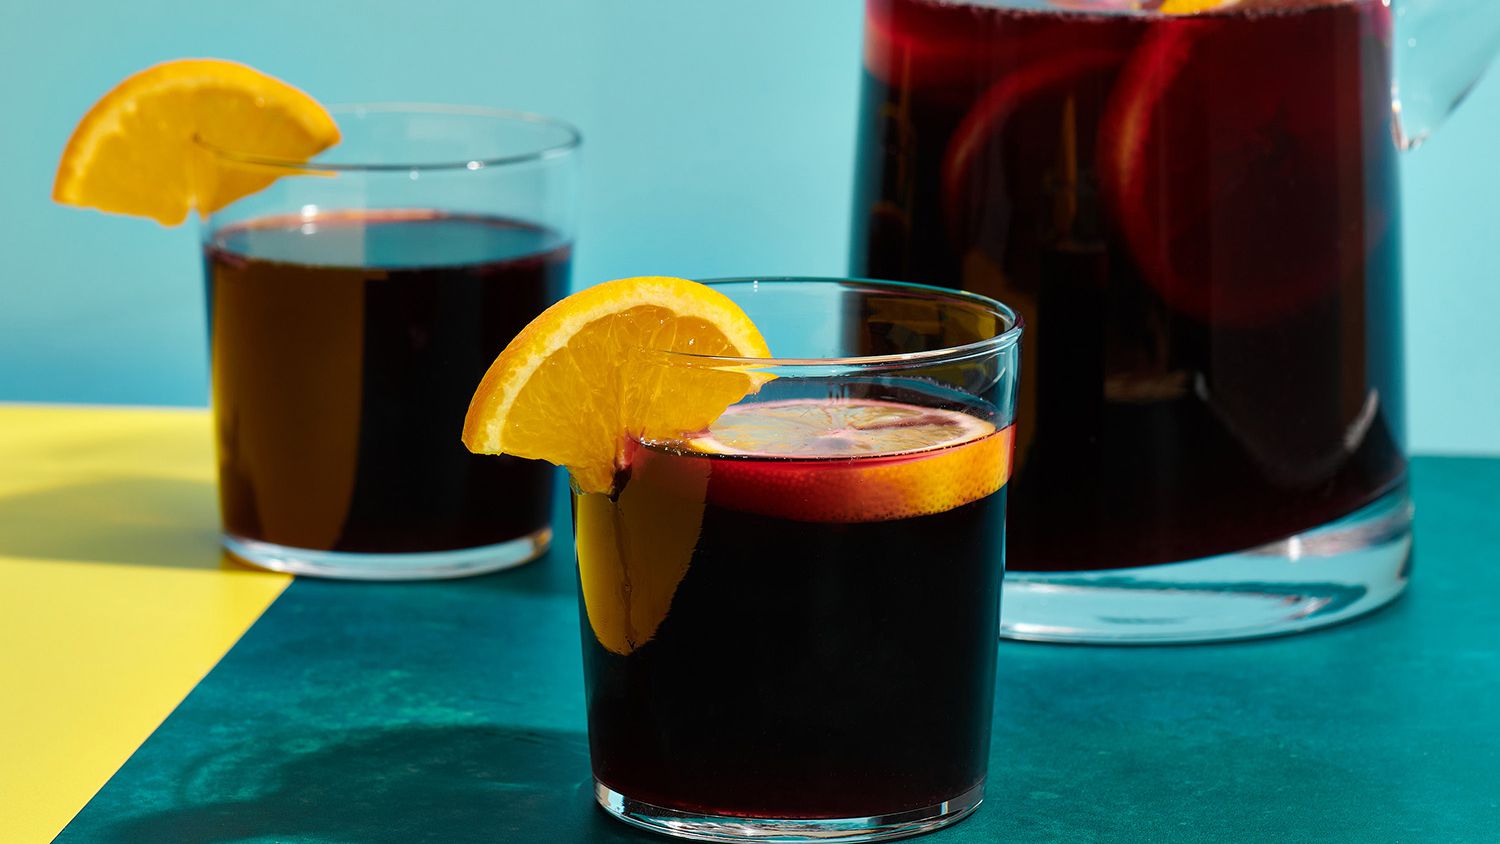 Is A Glass Of Sangria Good For You?